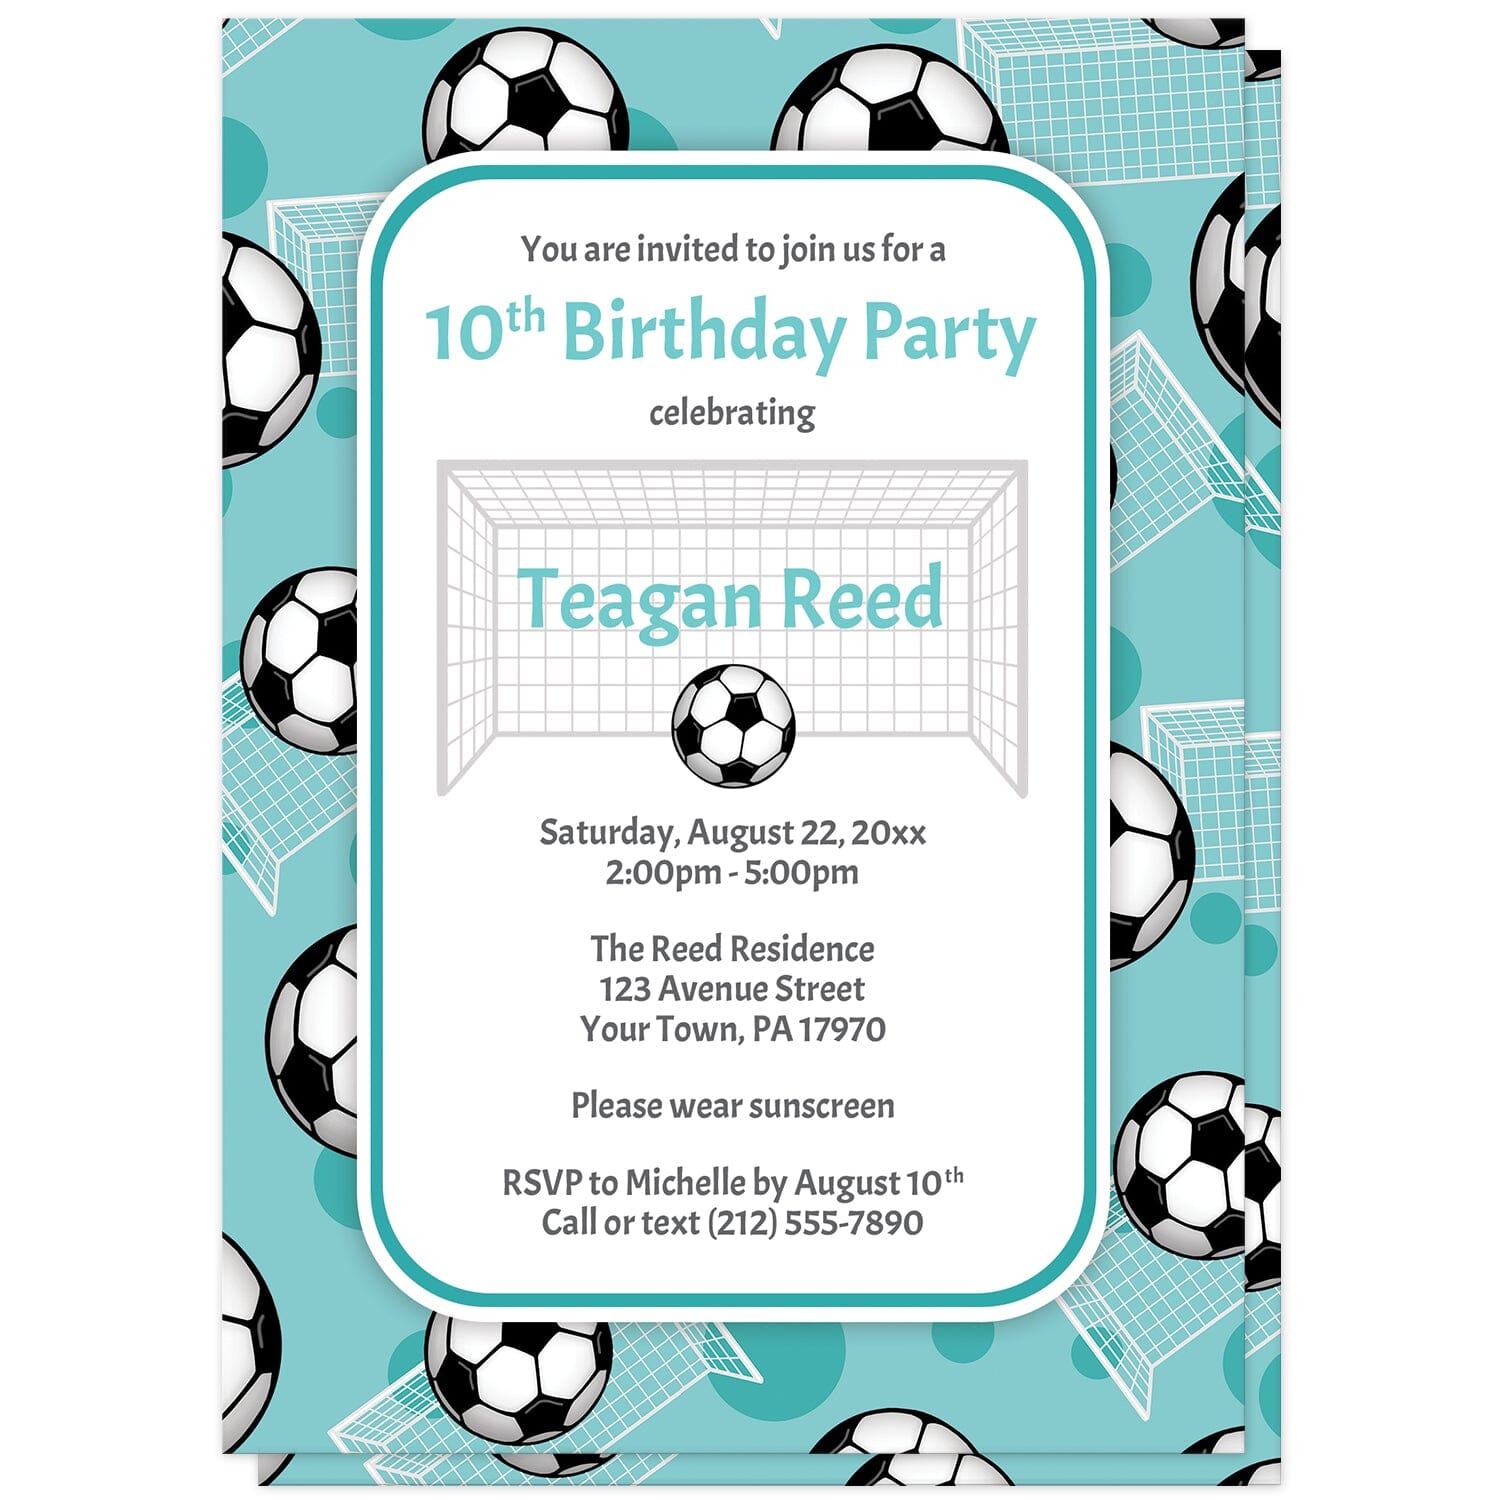 Soccer Ball and Goal Teal Birthday Party Invitations at Artistically Invited. Sports-themed soccer ball and goal teal birthday party invitations for any age or milestone that are uniquely illustrated with a pattern of soccer balls and soccer goals over a teal background color. Your personalized birthday party details are custom printed in teal and gray over white in the center over the soccer pattern.